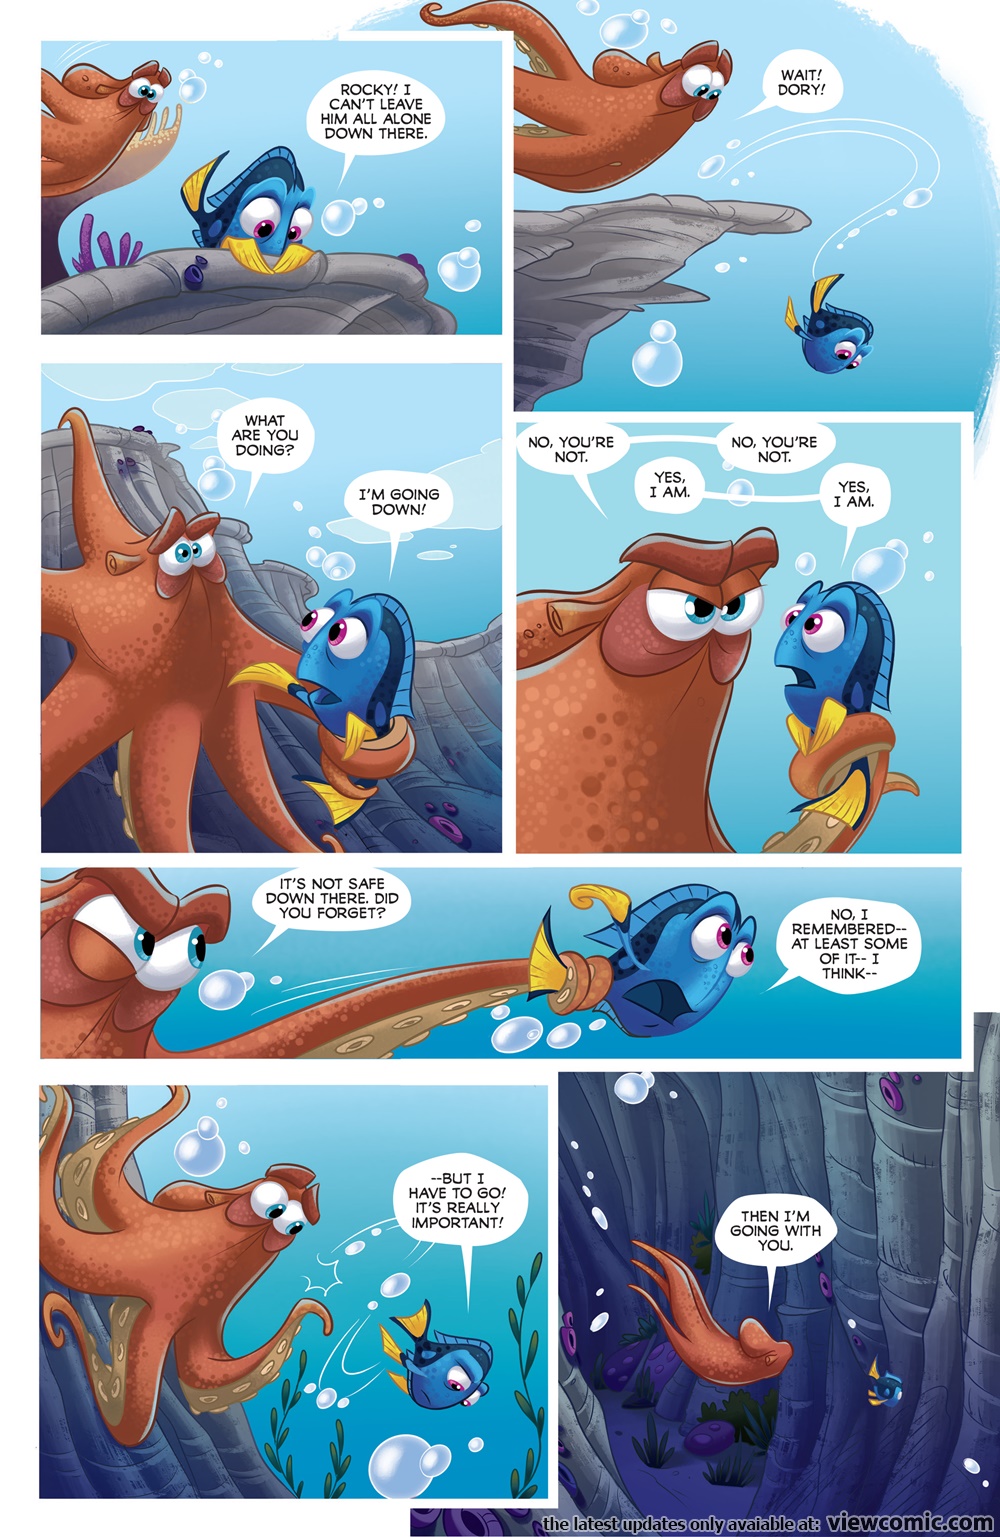 Finding Nemo Porn Comic - Disney Pixar Finding Dory 002 2017 | Read Disney Pixar Finding Dory 002  2017 comic online in high quality. Read Full Comic online for free - Read  comics online in high quality .| READ COMIC ONLINE